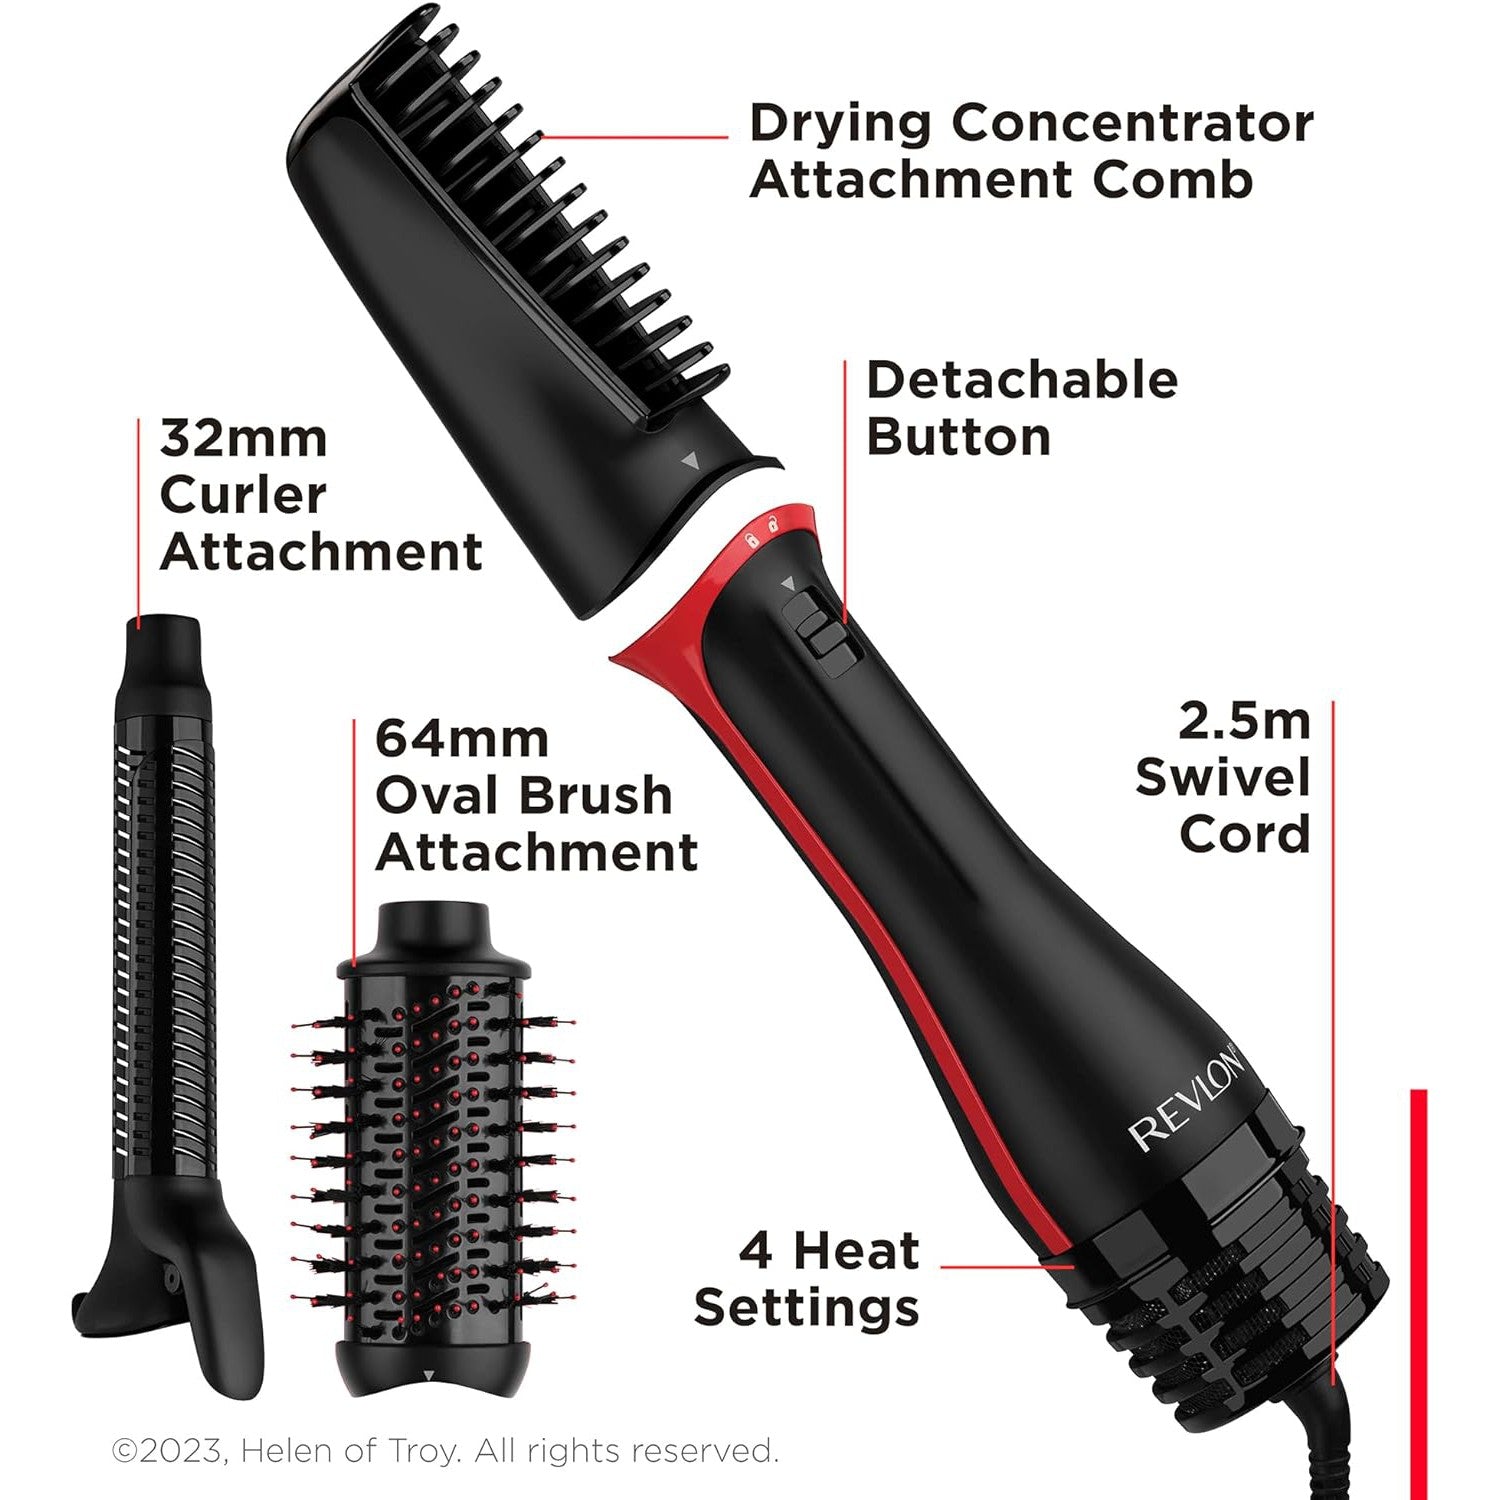 Revlon One-Step Blow-Dry Multi Styler - 3 in 1 Tool - Dry, curl and volumise with 3 attachments  RVDR5333